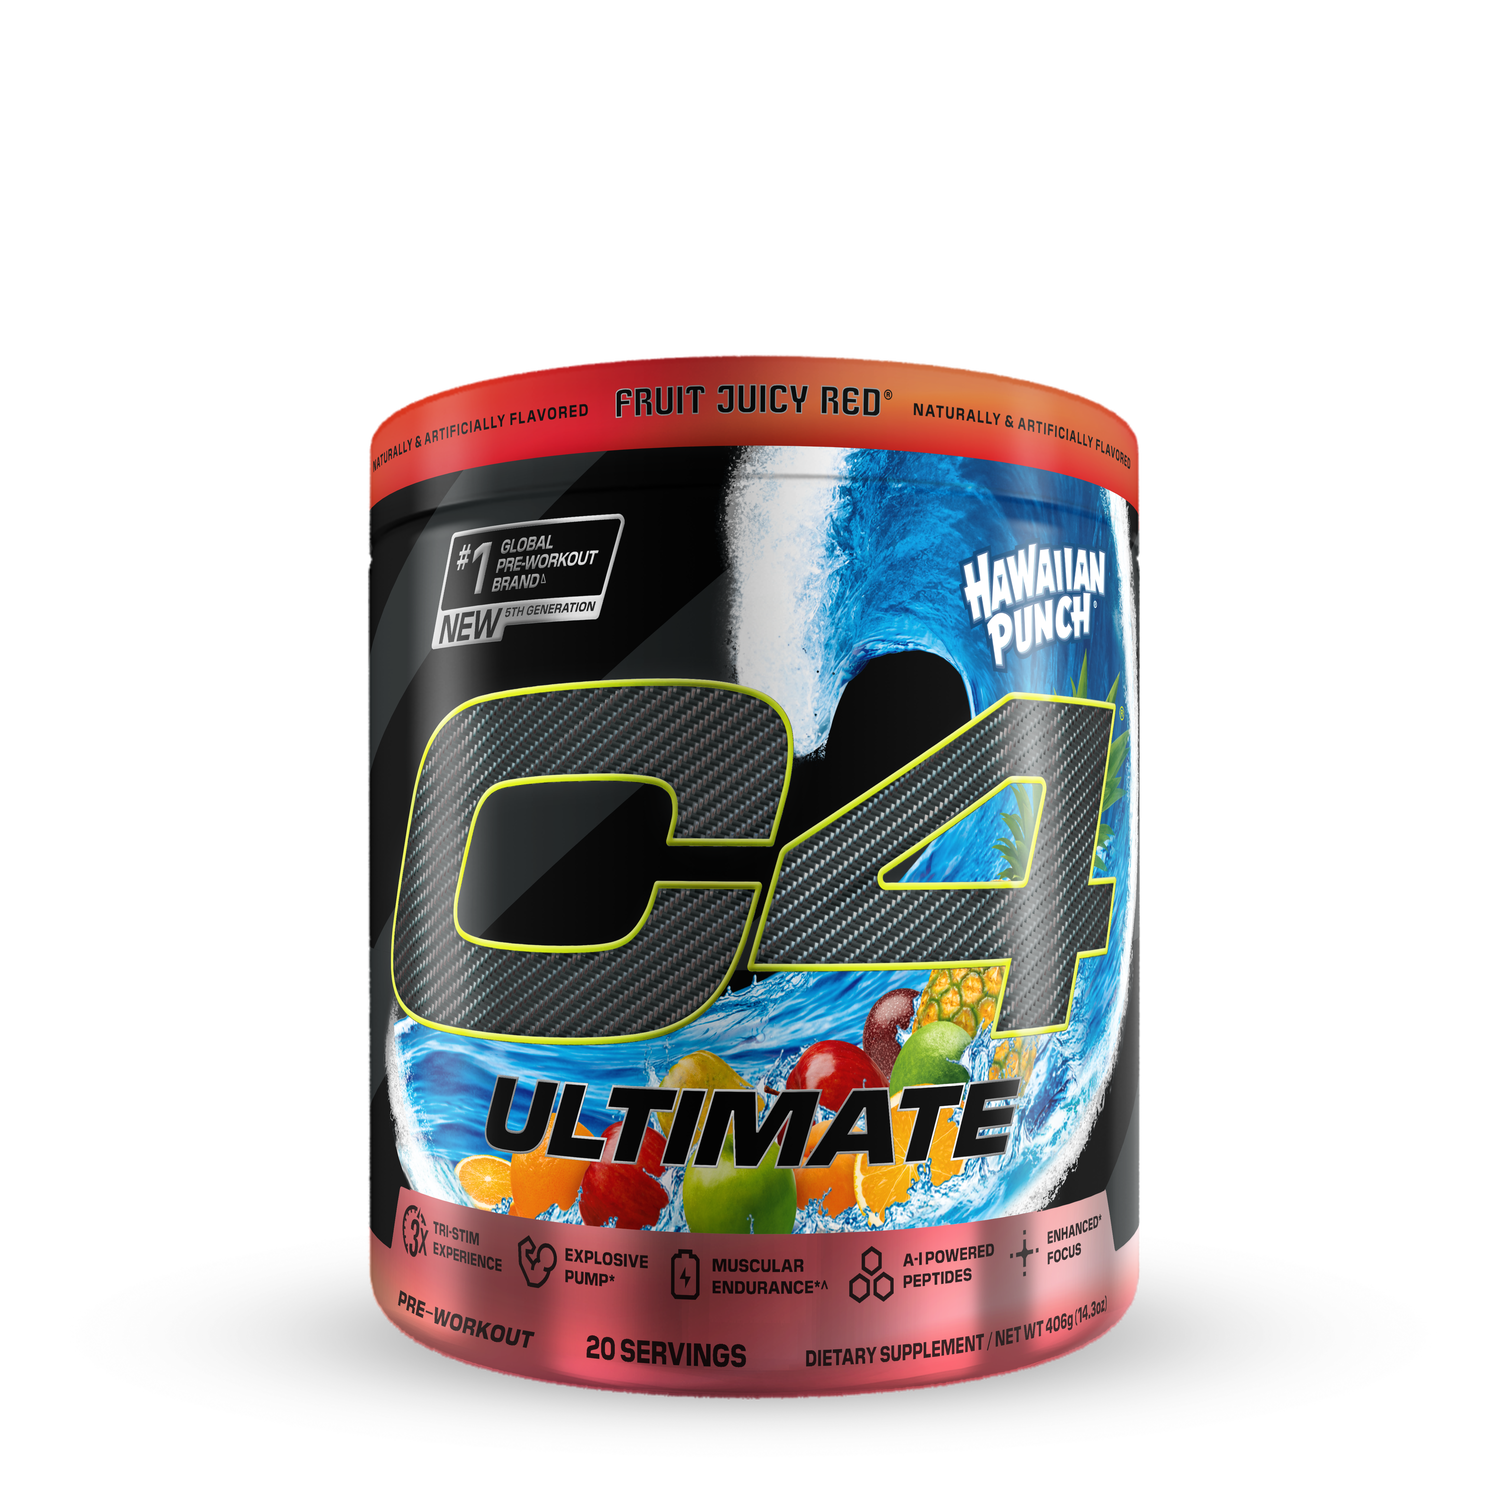 Cellucor C4 Ultimate Pre-Workout